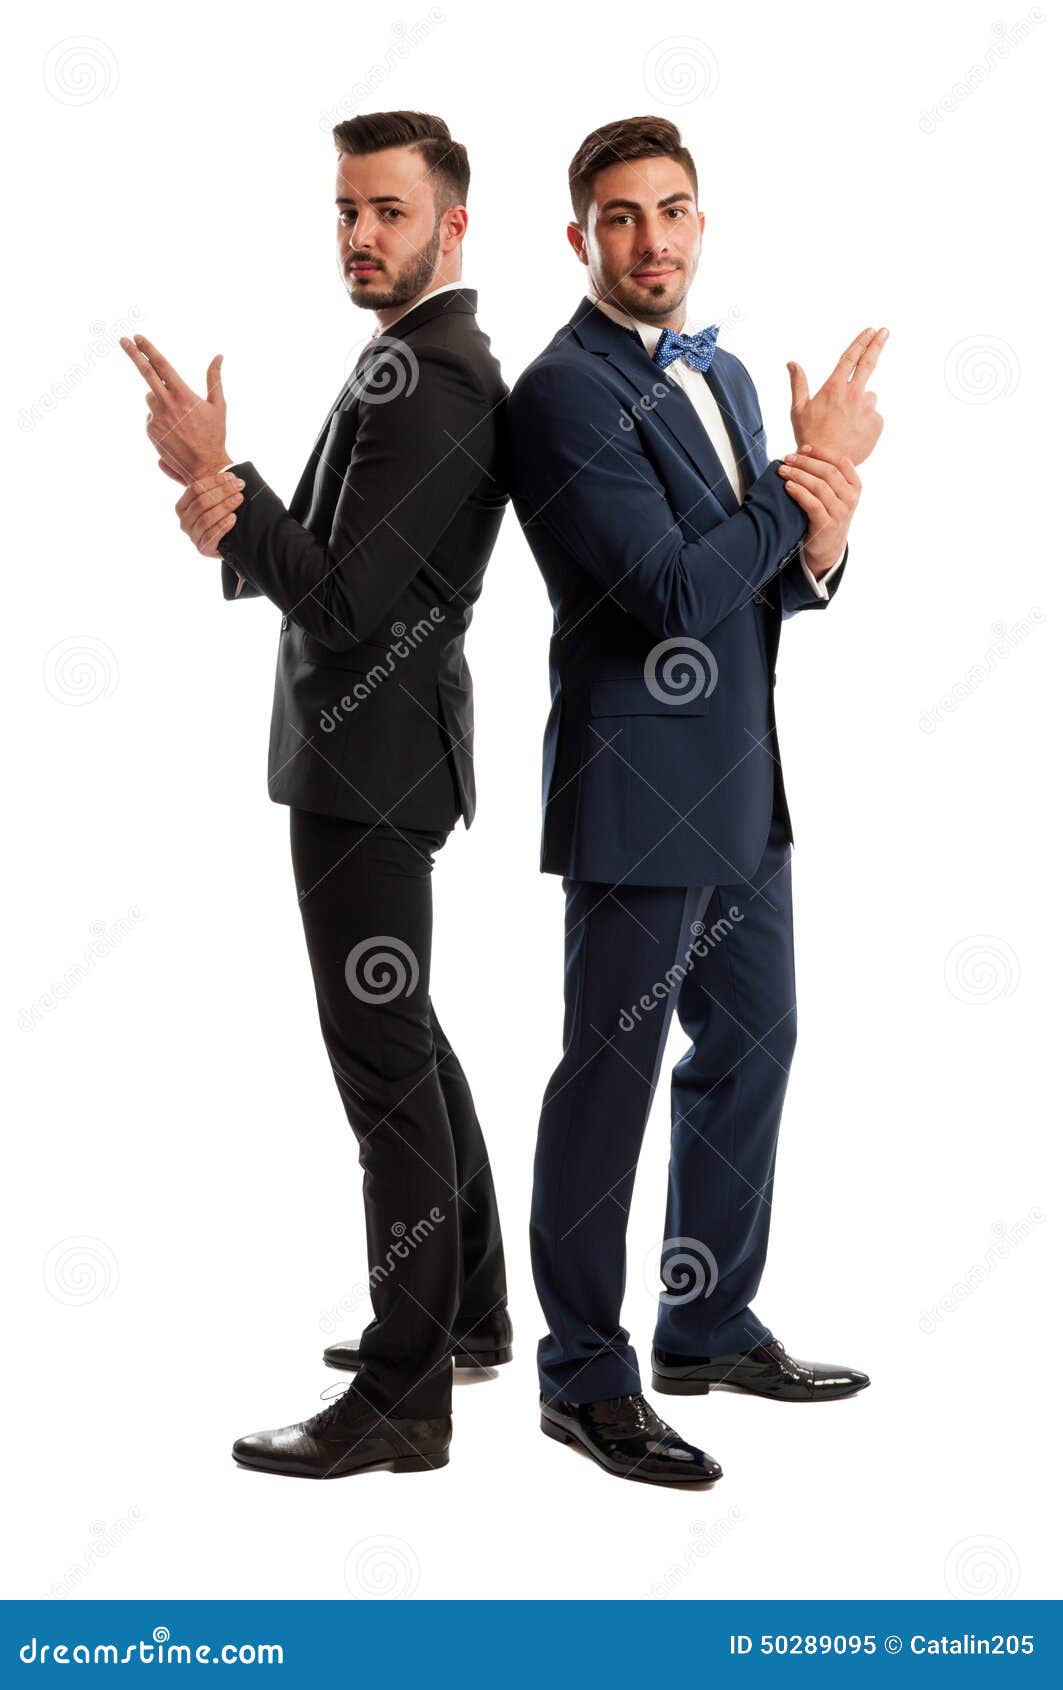 Business Competitors Back To Back Concept Stock Image - Image of rivals ...